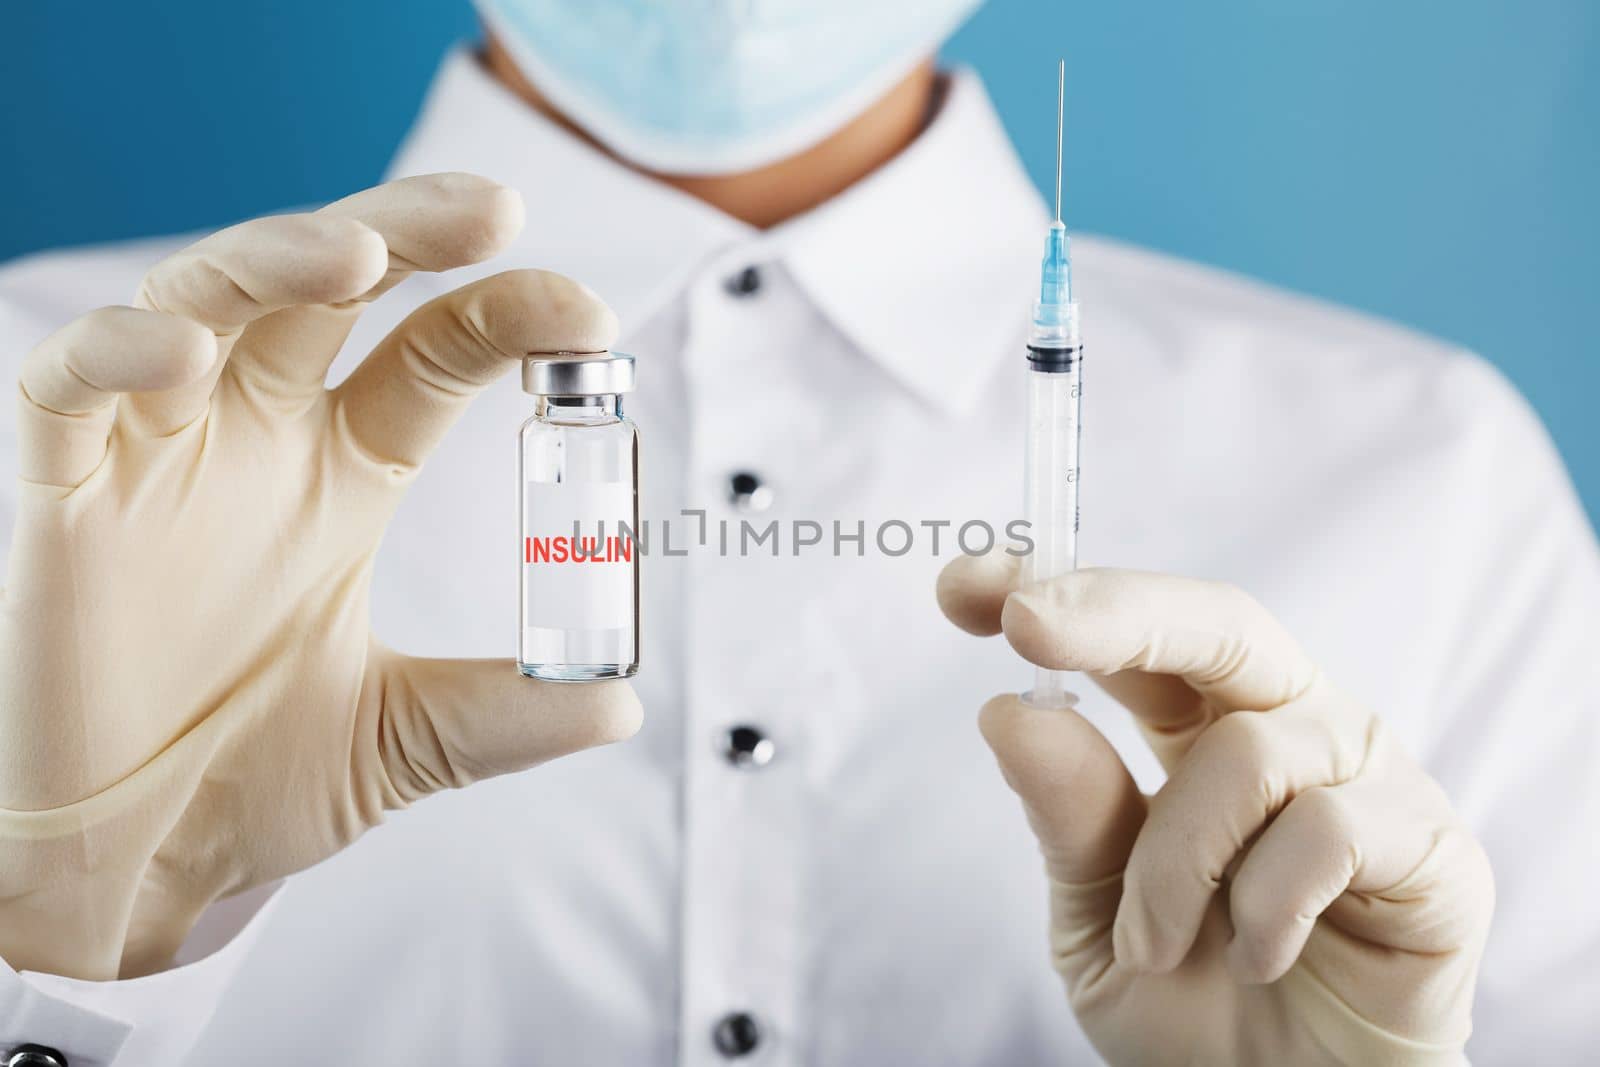 The doctor holds a syringe for injections and an ampoule with insulin for the treatment of Diabetes